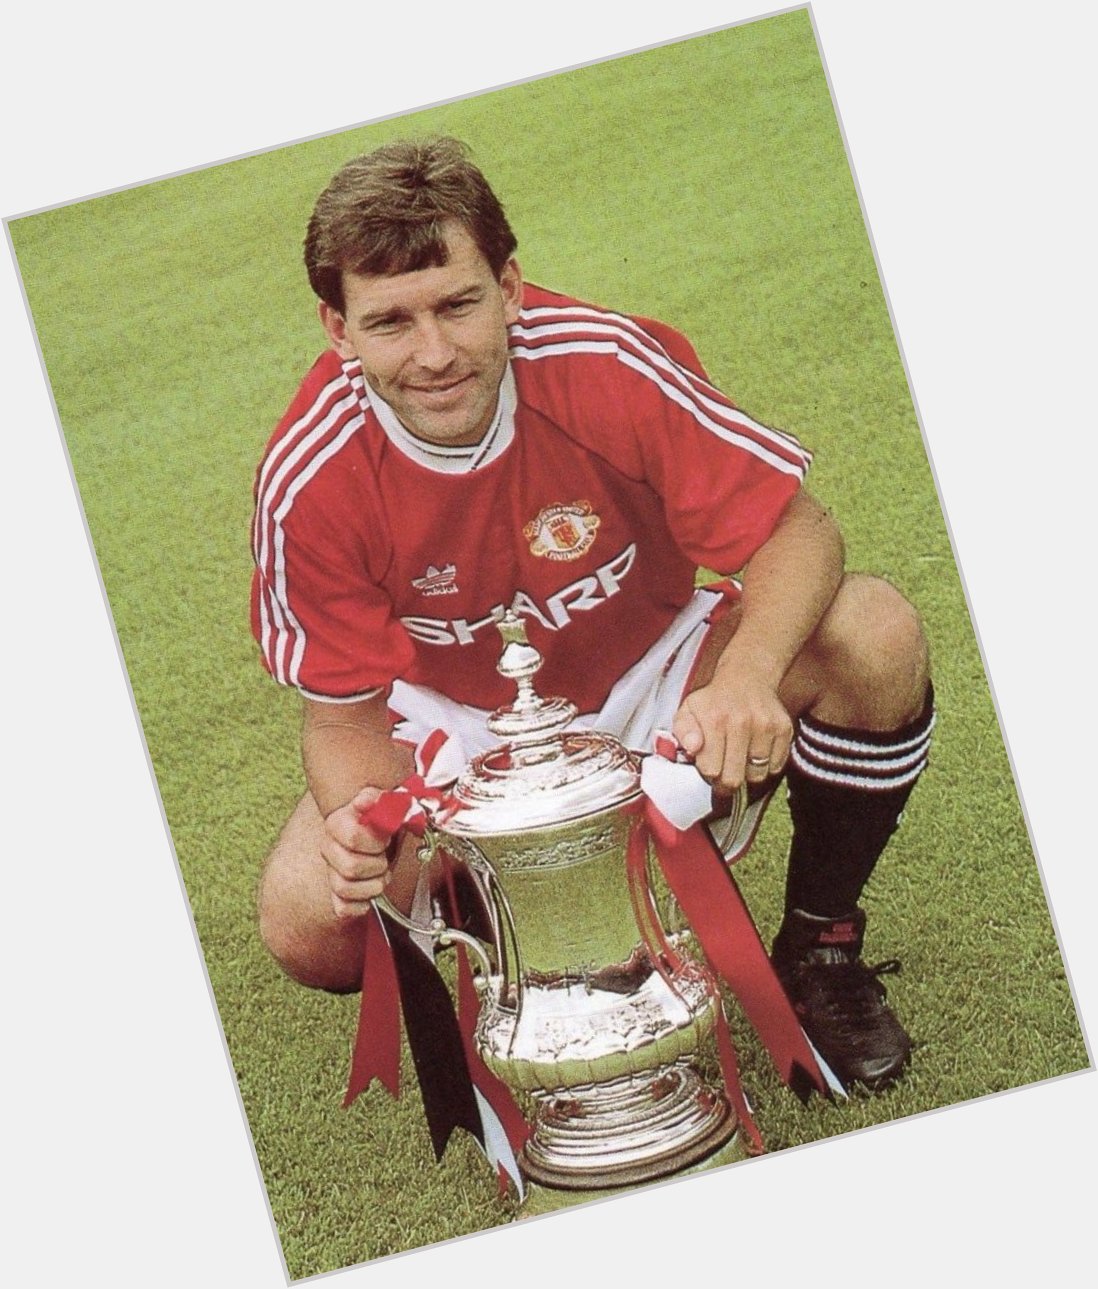 Happy Birthday to one of the greatest s of all time, Bryan Robson 